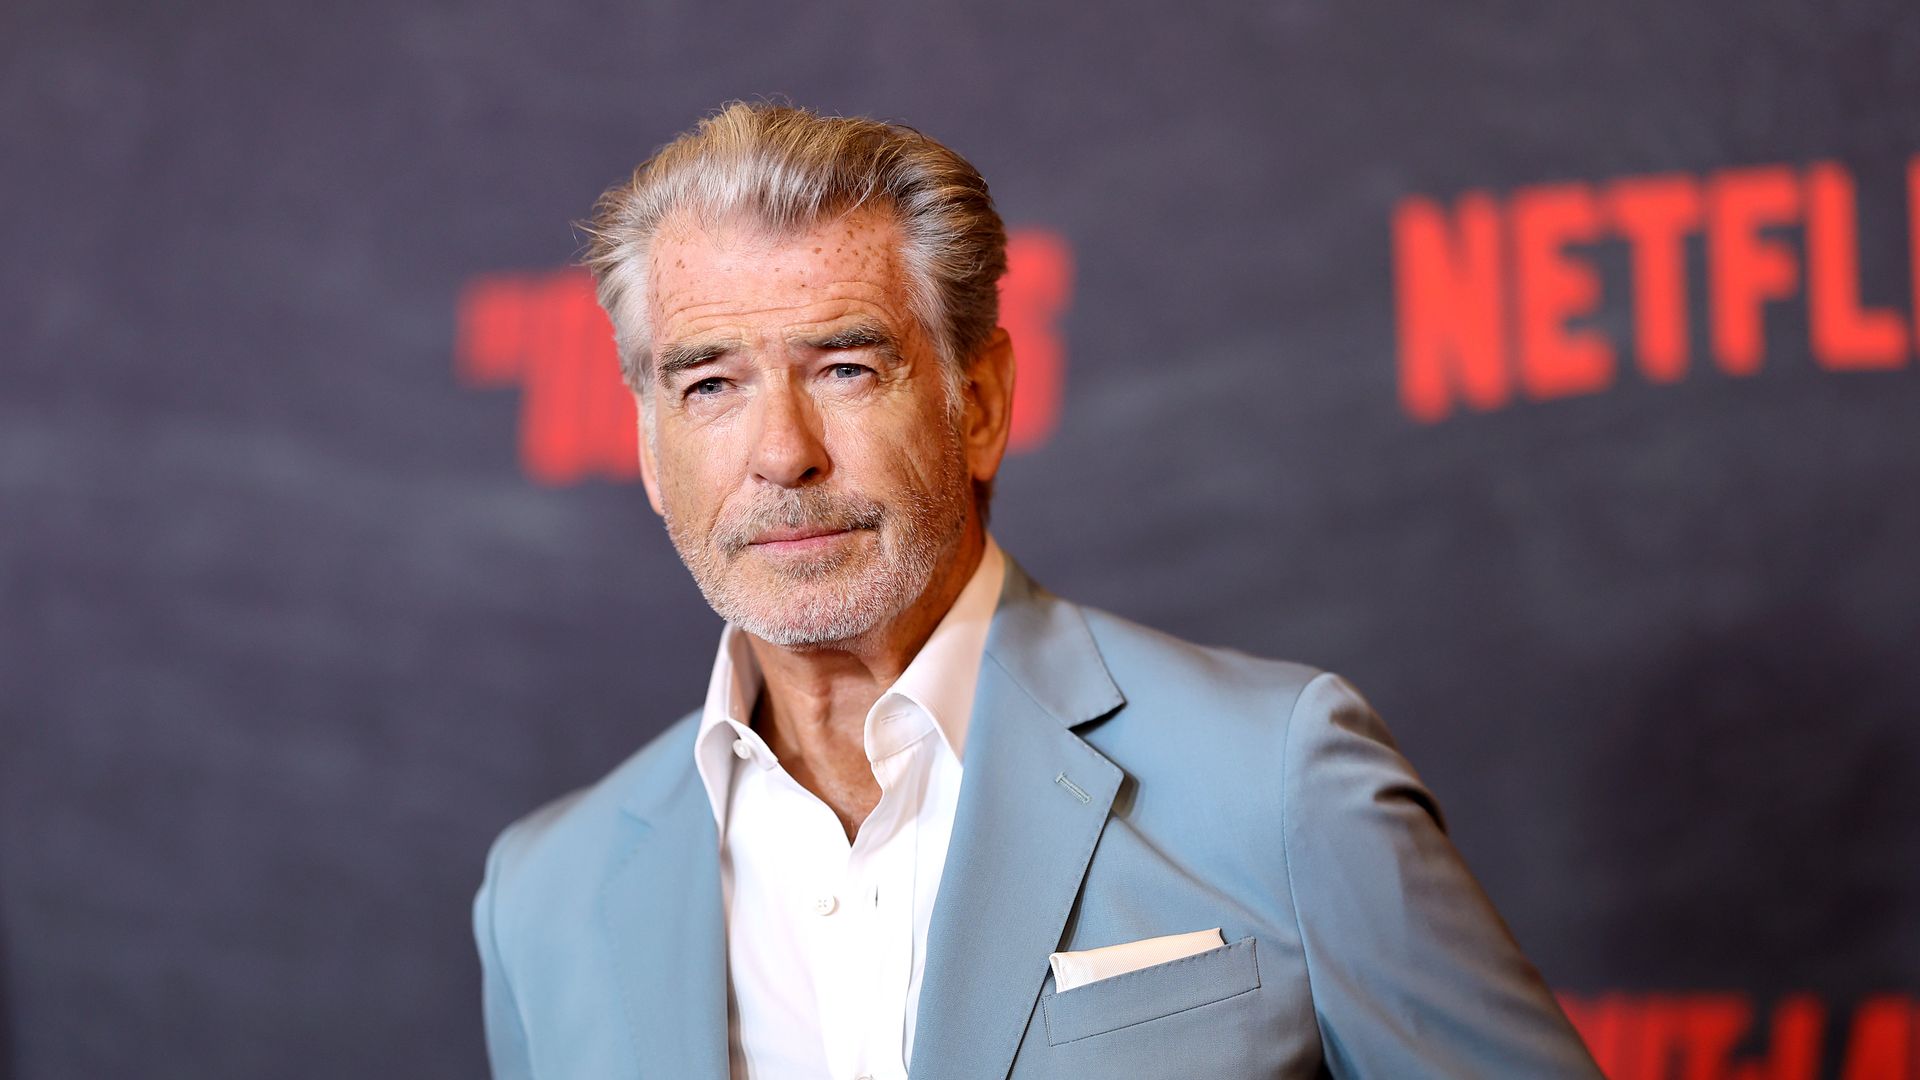 Pierce Brosnan attends the Los Angeles Premiere Of Netflix's "The Out-Laws" at Regal LA Live on June 26, 2023 in Los Angeles, California